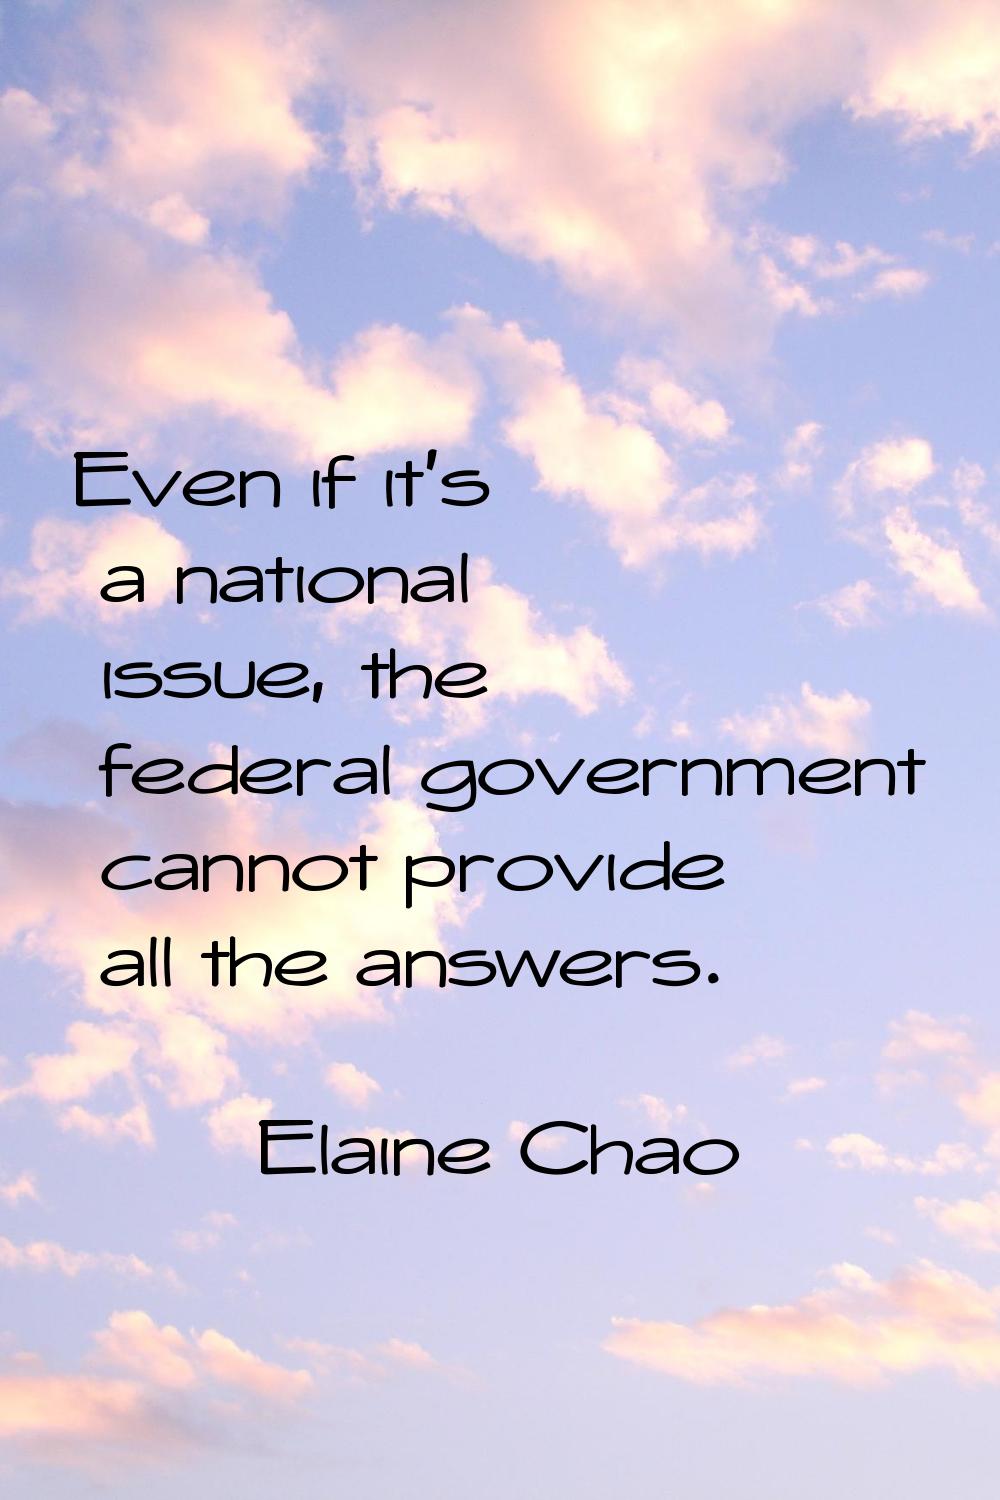 Even if it's a national issue, the federal government cannot provide all the answers.